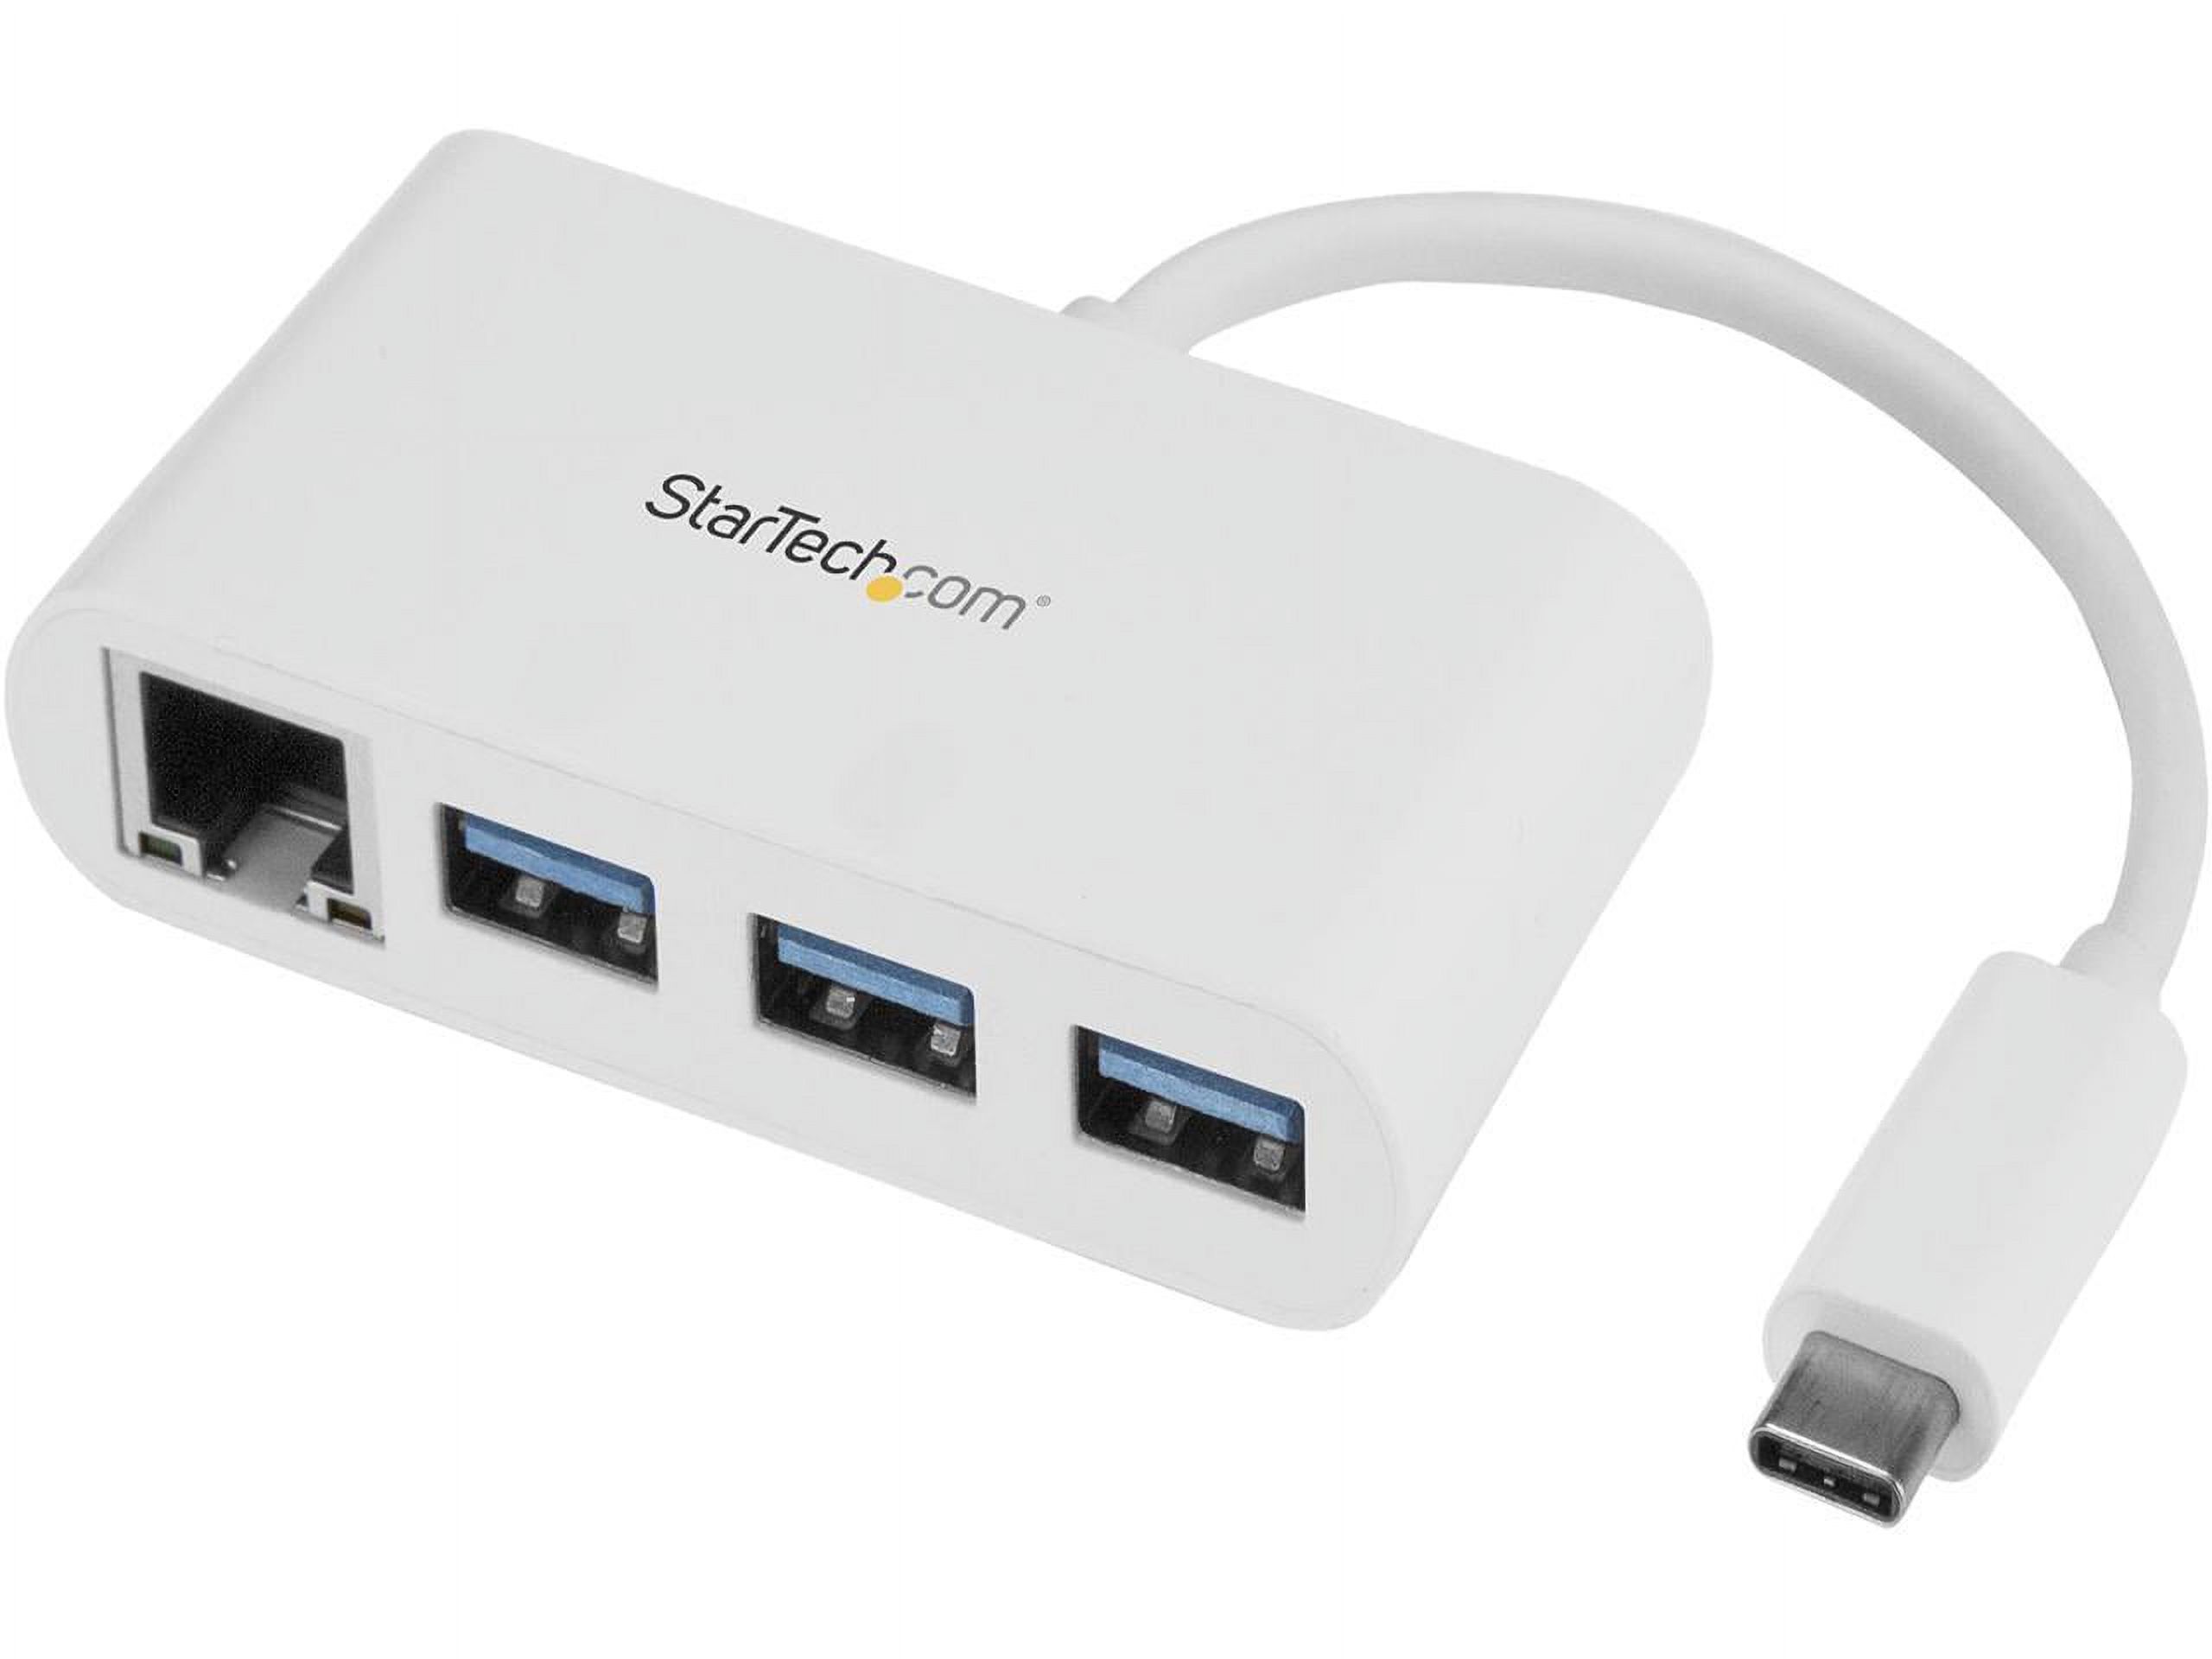 StarTech HB30C3A1GEA USB-C to Ethernet Adapter with 3 Port USB C Hub - Gigabit - White - Thunderbolt 3 Compatible - MacBook Pro 2016 - image 1 of 4